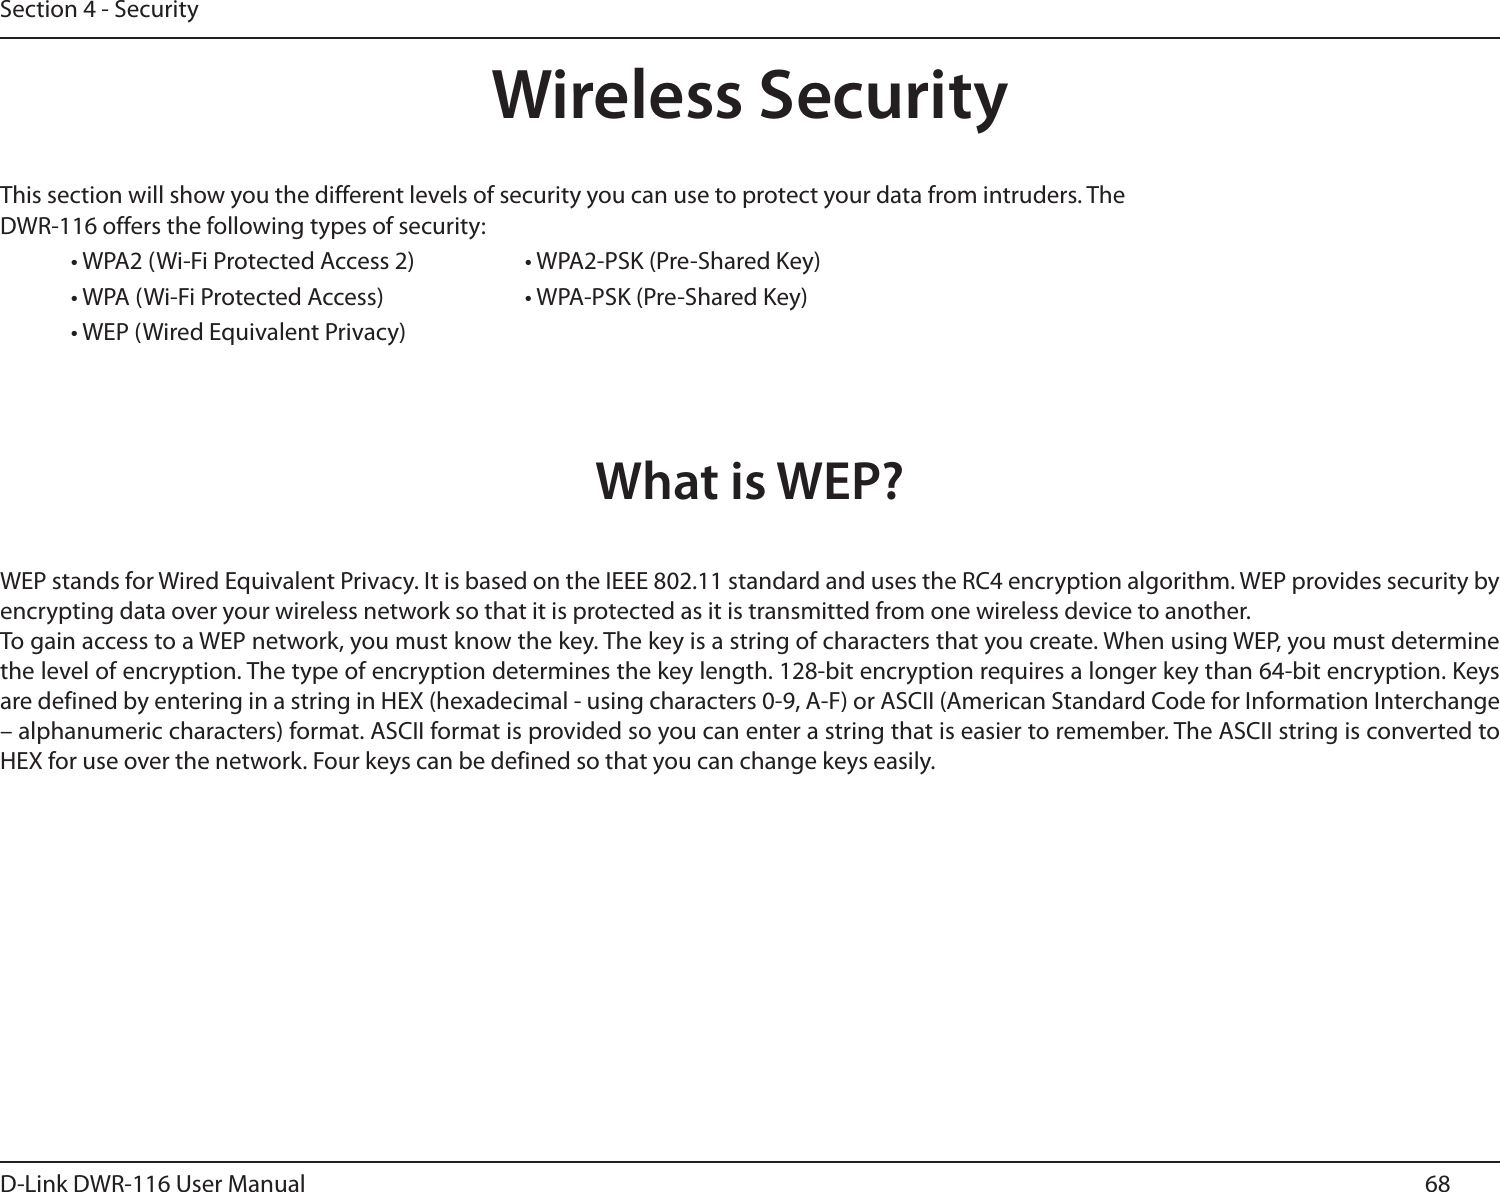 68D-Link DWR-116 User ManualSection 4 - SecurityWireless SecurityThis section will show you the different levels of security you can use to protect your data from intruders. The DWR-116 offers the following types of security:• WPA2 (Wi-Fi Protected Access 2)     • WPA2-PSK (Pre-Shared Key)• WPA (Wi-Fi Protected Access)    • WPA-PSK (Pre-Shared Key)• WEP (Wired Equivalent Privacy)What is WEP?WEP stands for Wired Equivalent Privacy. It is based on the IEEE 802.11 standard and uses the RC4 encryption algorithm. WEP provides security by encrypting data over your wireless network so that it is protected as it is transmitted from one wireless device to another.To gain access to a WEP network, you must know the key. The key is a string of characters that you create. When using WEP, you must determine the level of encryption. The type of encryption determines the key length. 128-bit encryption requires a longer key than 64-bit encryption. Keys are defined by entering in a string in HEX (hexadecimal - using characters 0-9, A-F) or ASCII (American Standard Code for Information Interchange – alphanumeric characters) format. ASCII format is provided so you can enter a string that is easier to remember. The ASCII string is converted to HEX for use over the network. Four keys can be defined so that you can change keys easily.